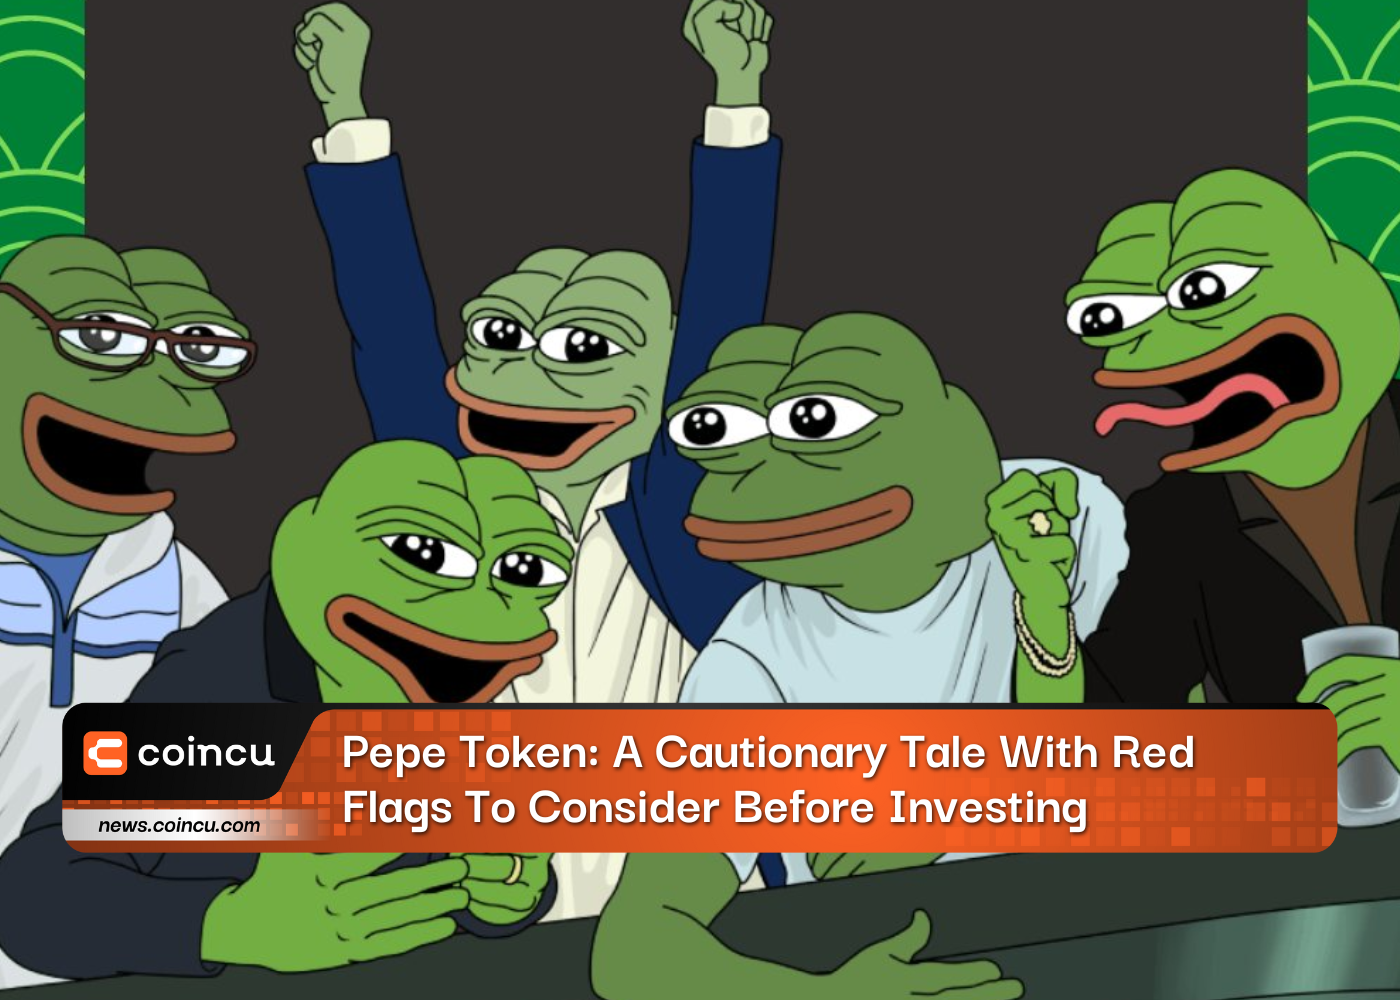 Pepe Token: A Cautionary Tale With Red Flags To Consider Before Investing